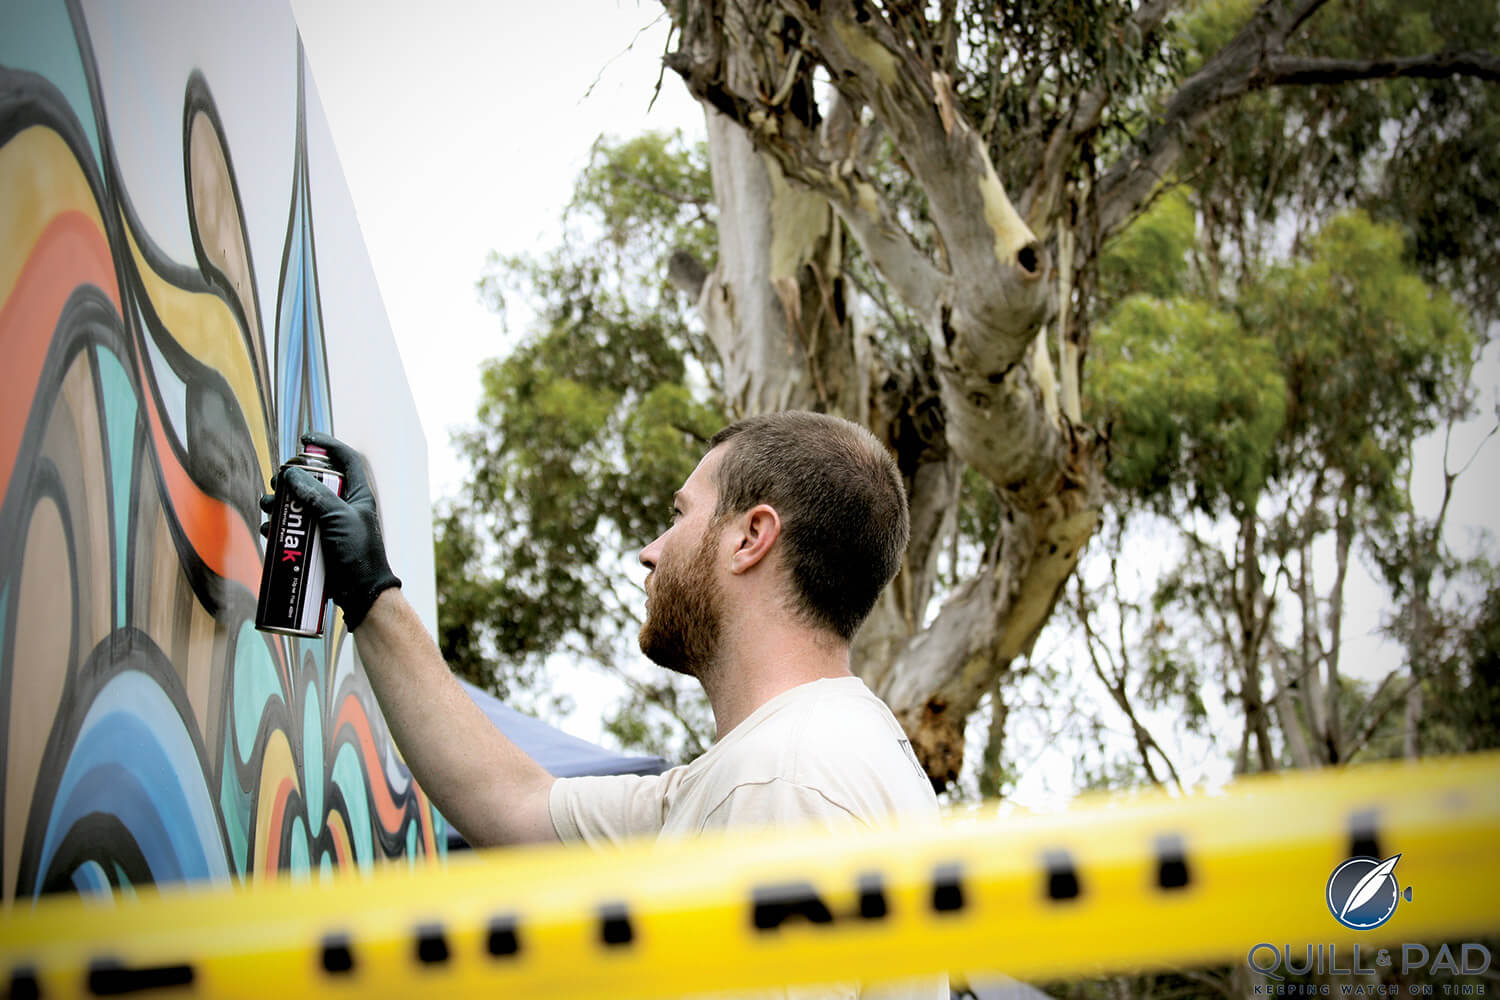 Annual Adelaide Hills street art competition hosted by Longview Vineyards winemakers Mark and Peter Saturno